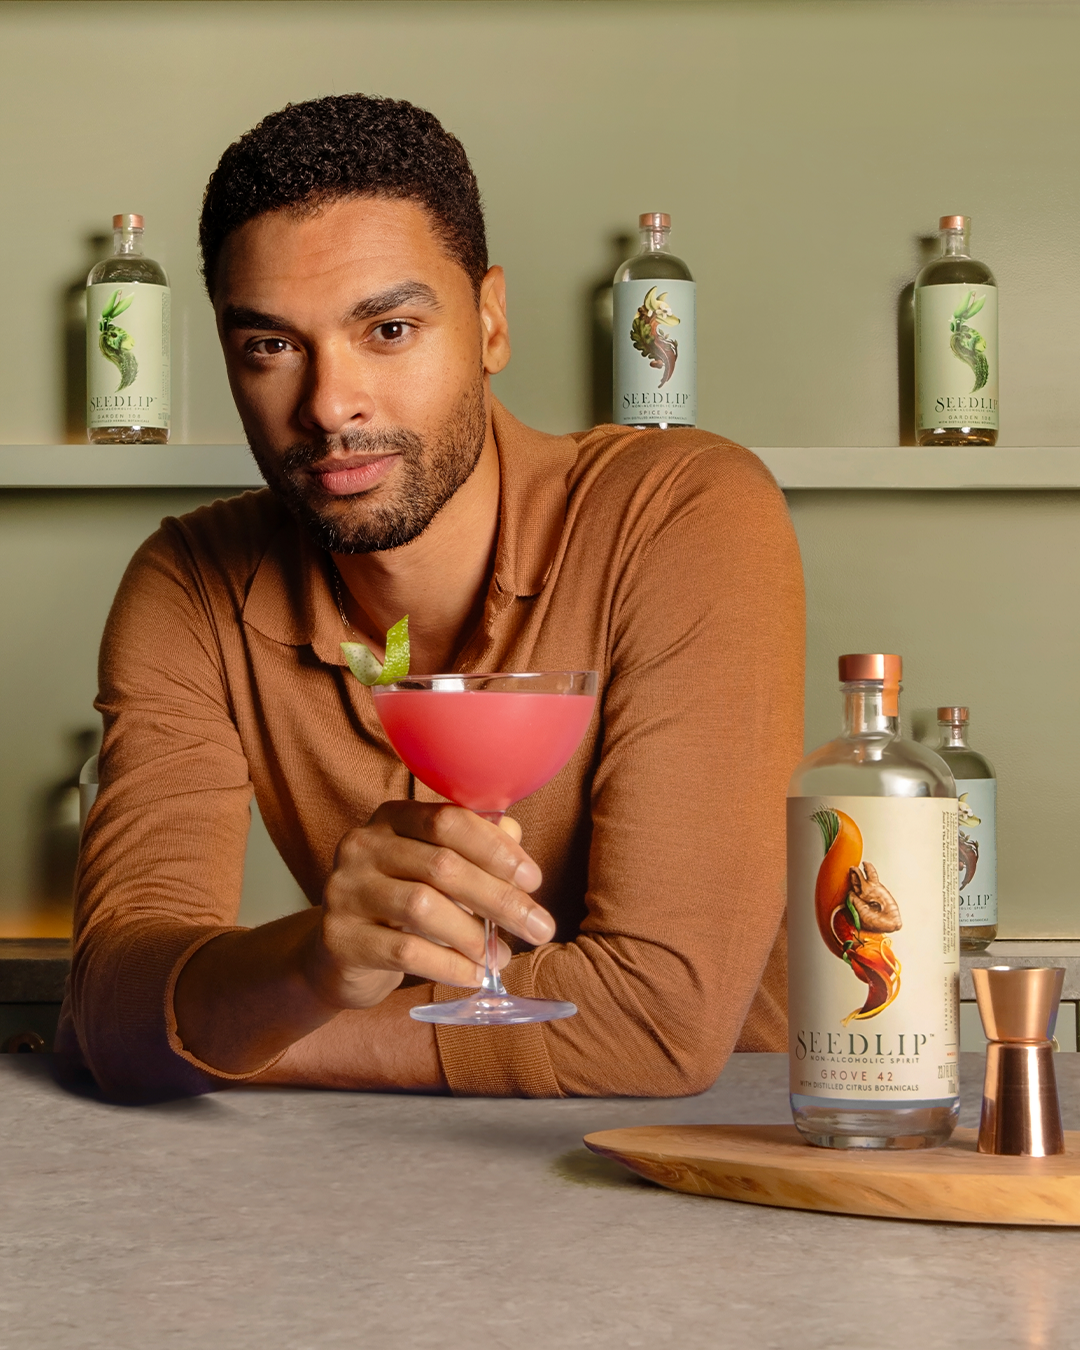 Let’s Toast: Regé-Jean Page Talks Choosing Differently With New Campaign For Non-Alcoholic Spirit Brand Seedlip